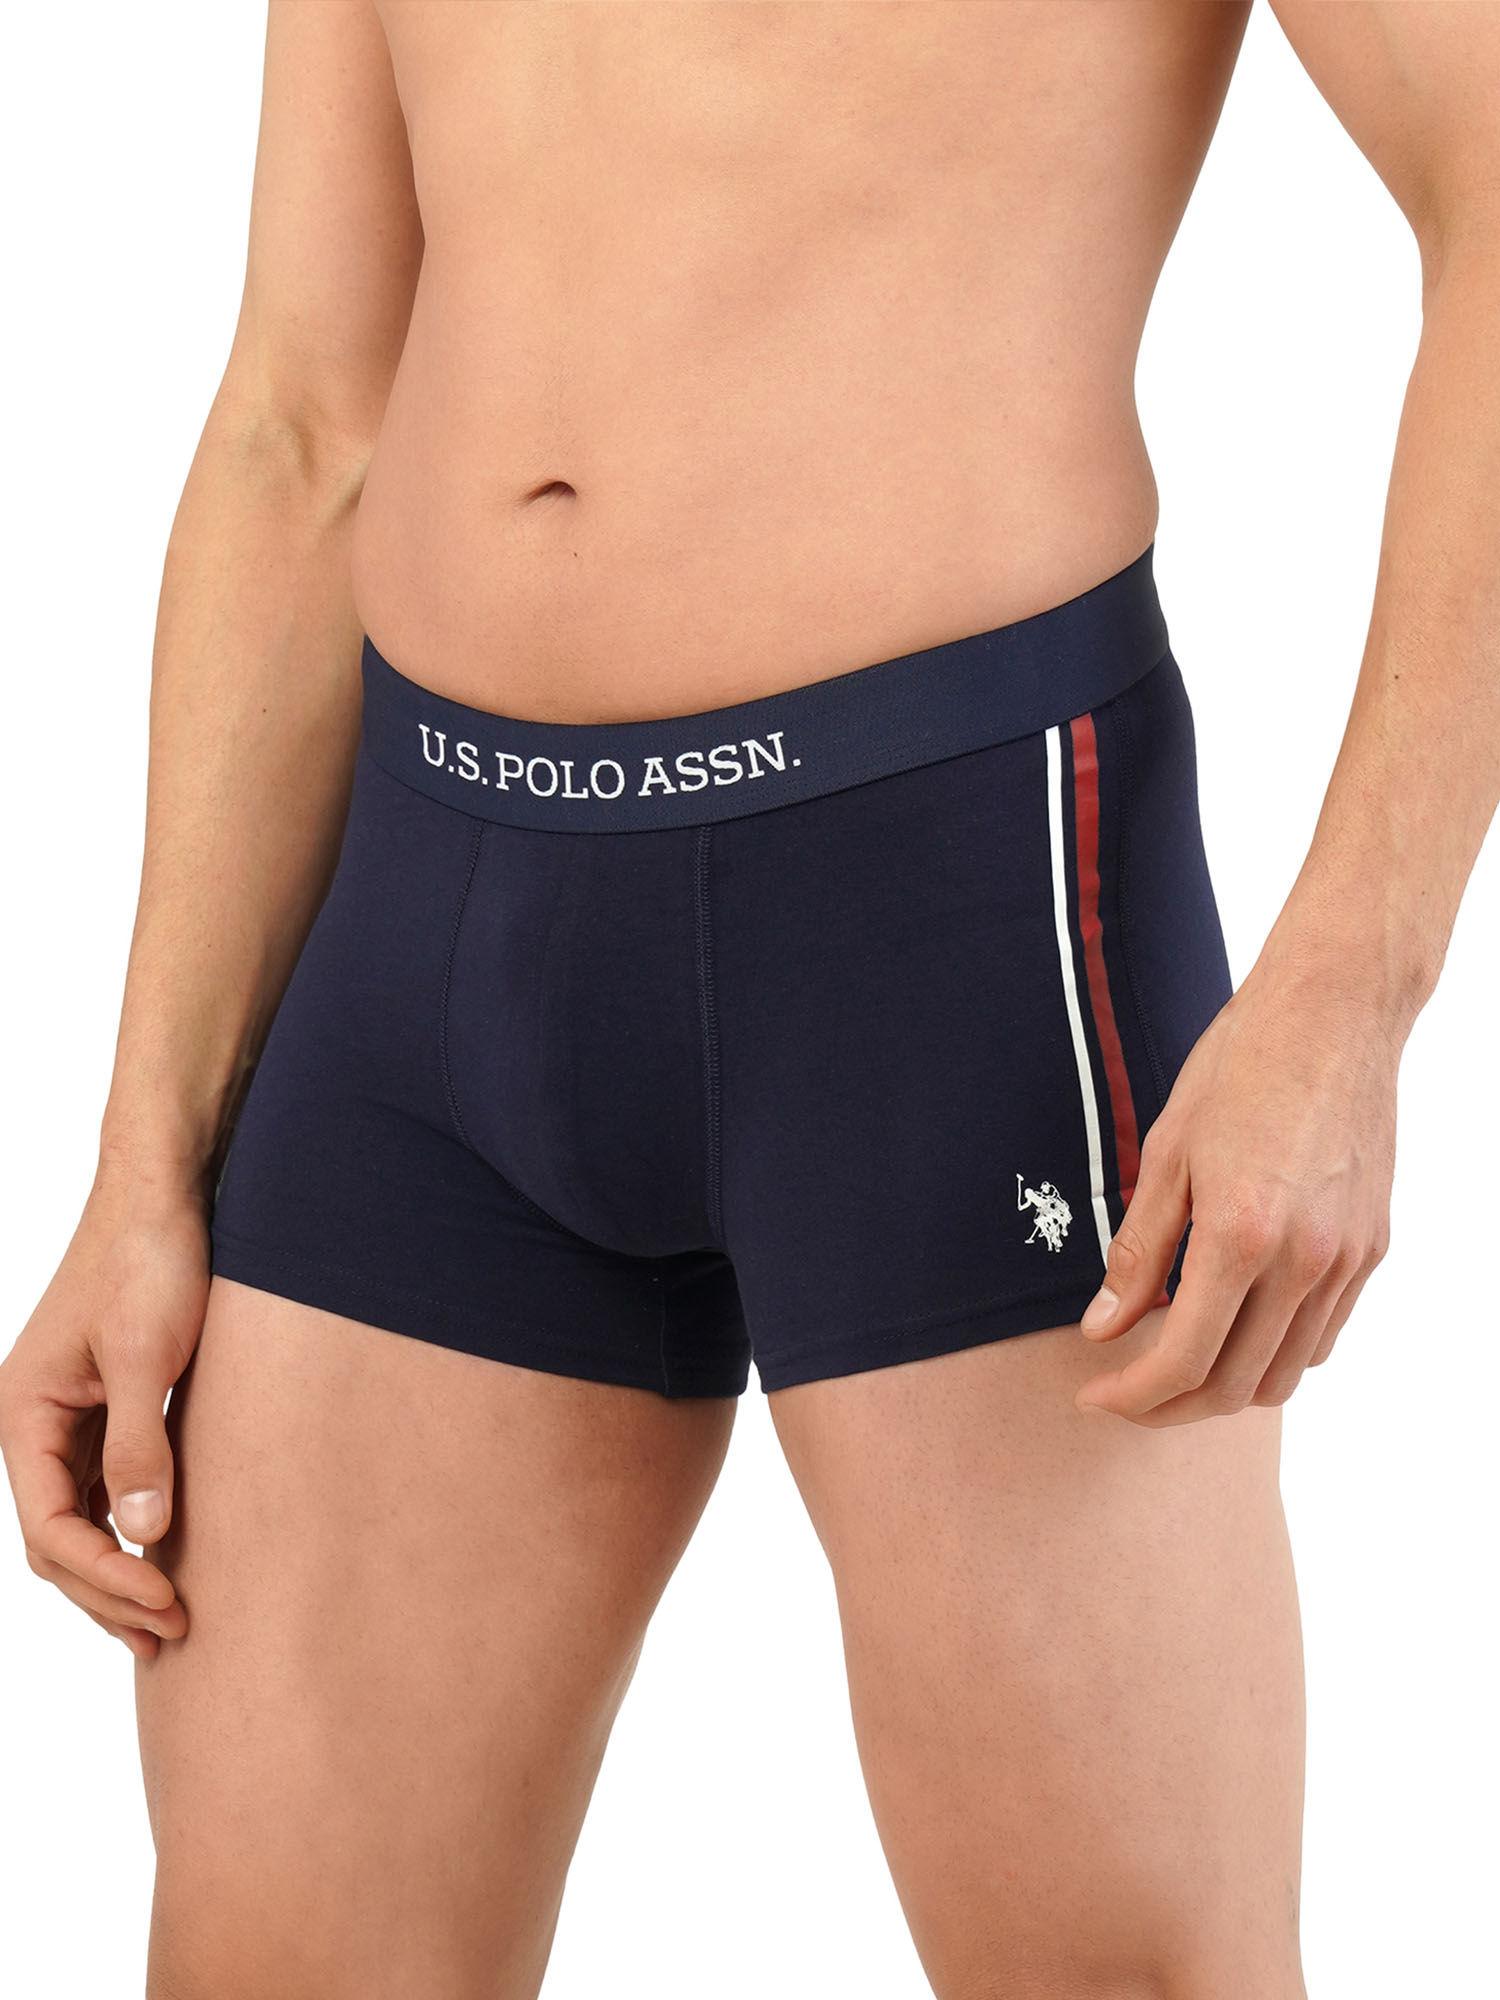 mens solid cotton mid rise trunks navy blue